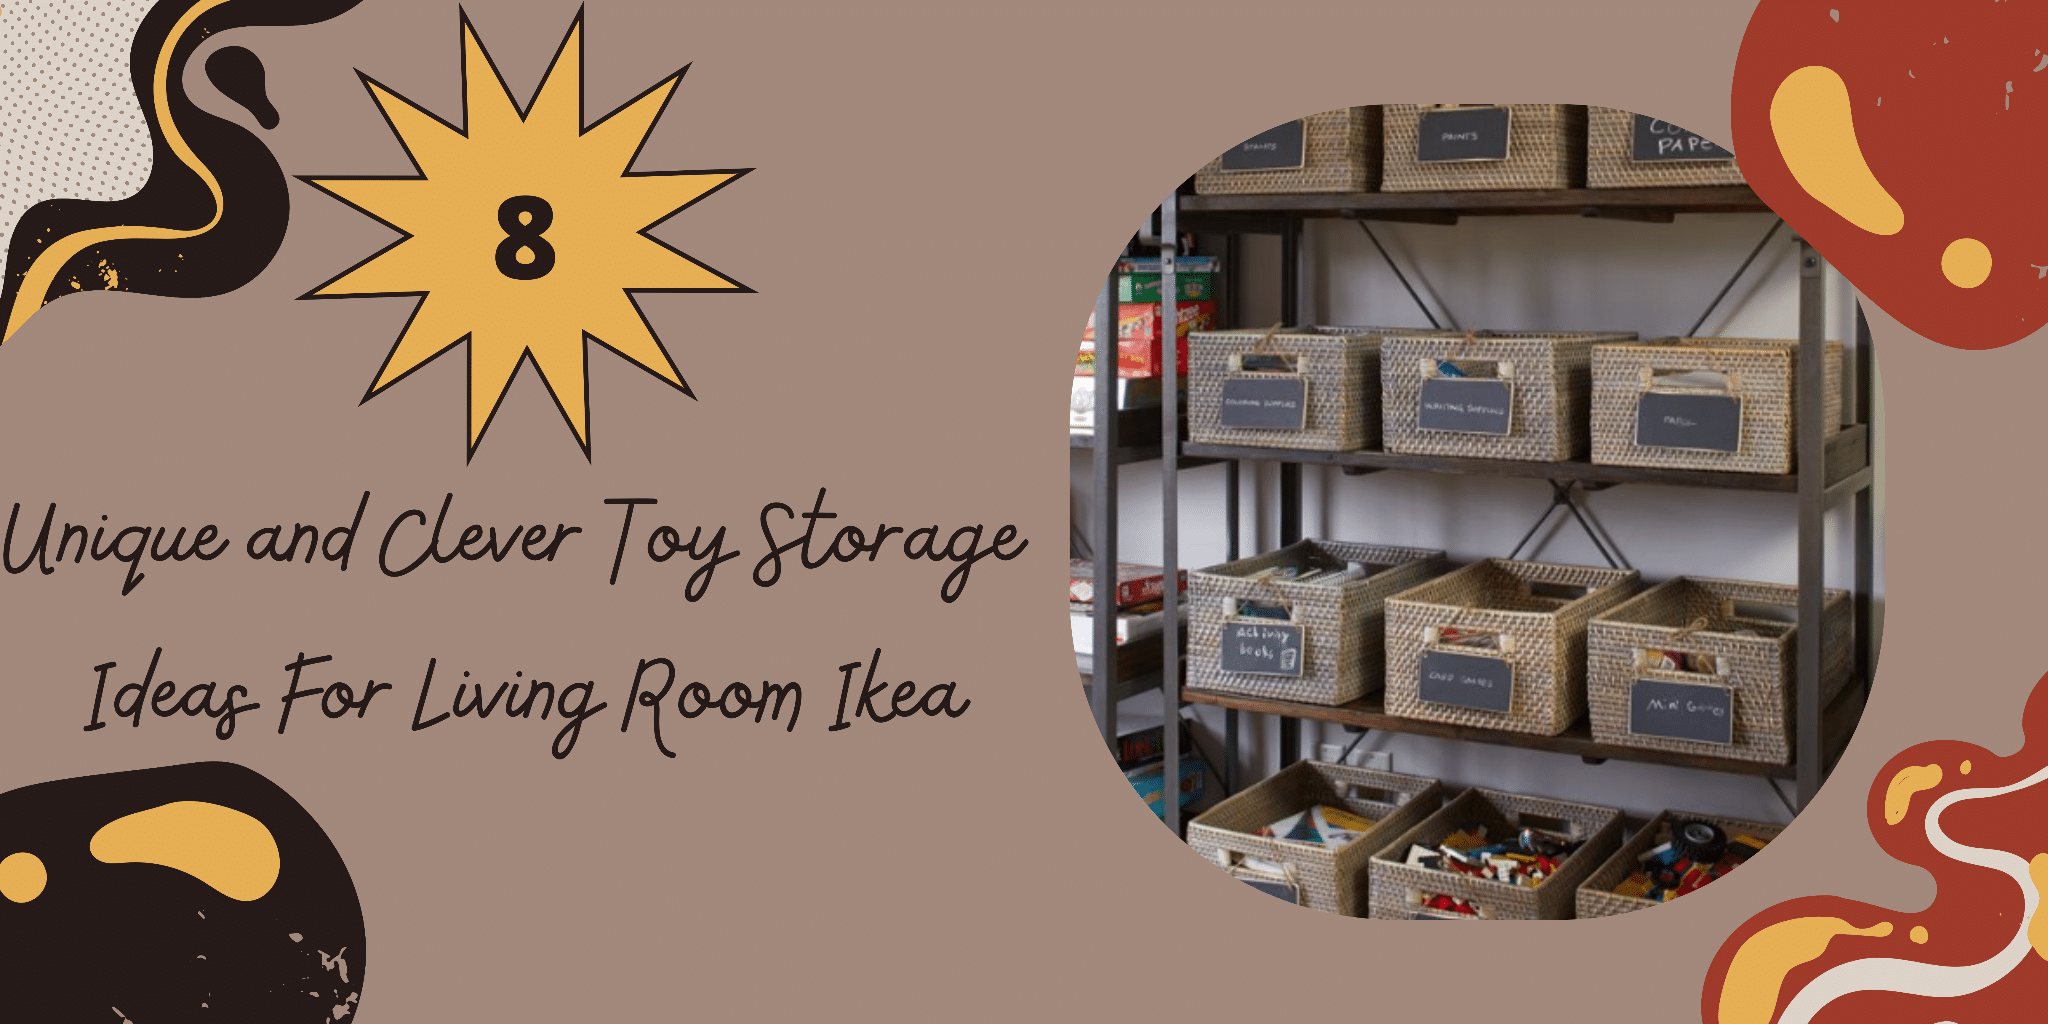 8 Unique and Clever Toy Storage Ideas For Living Room IKEA